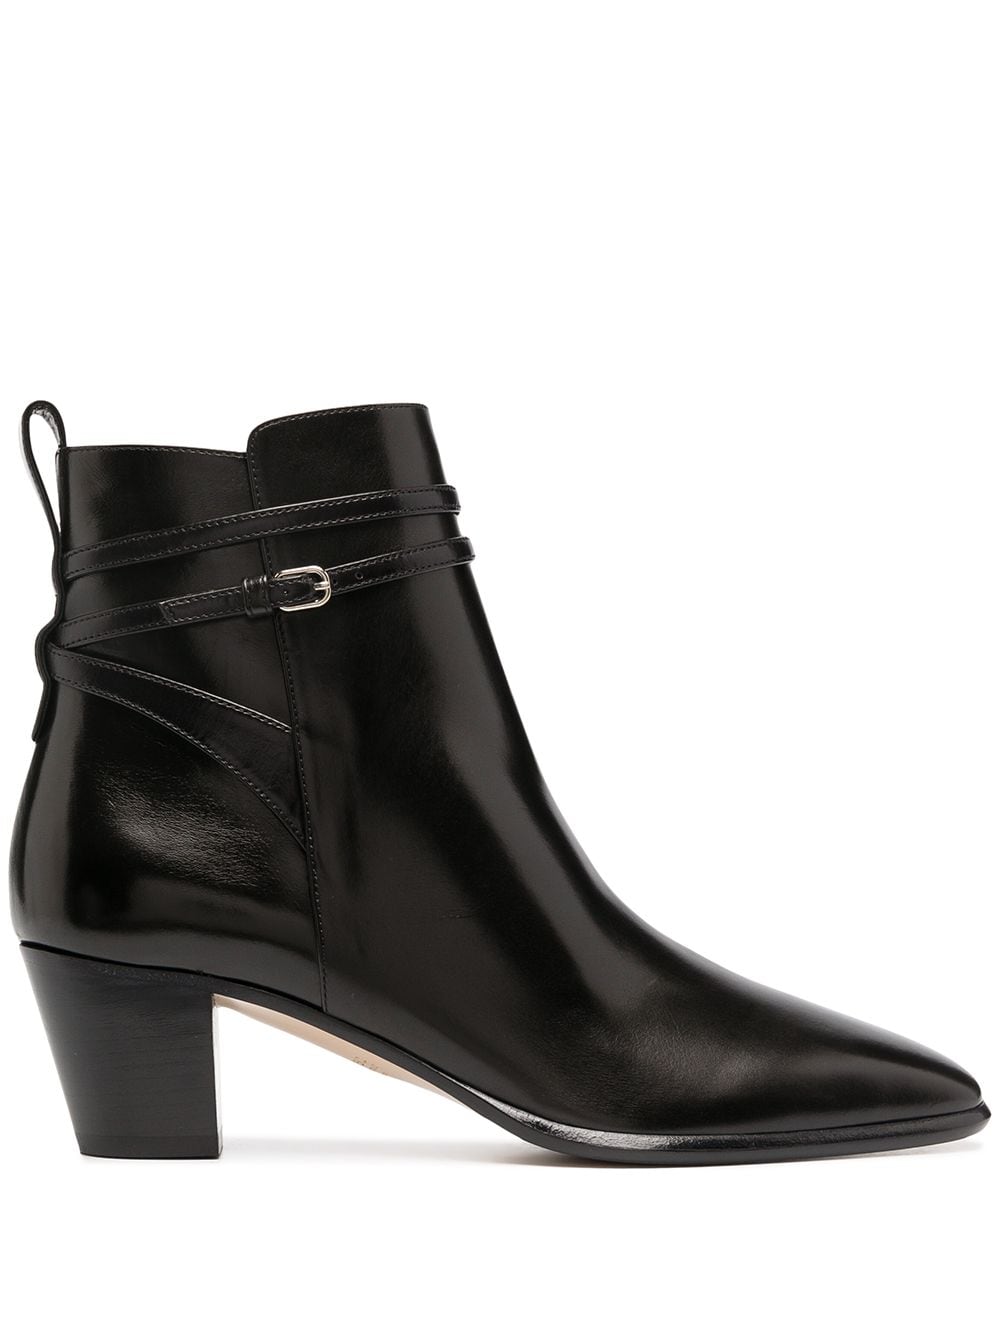 Leather Ankle Boots дамски обувки Francesco Russo 849681639_36